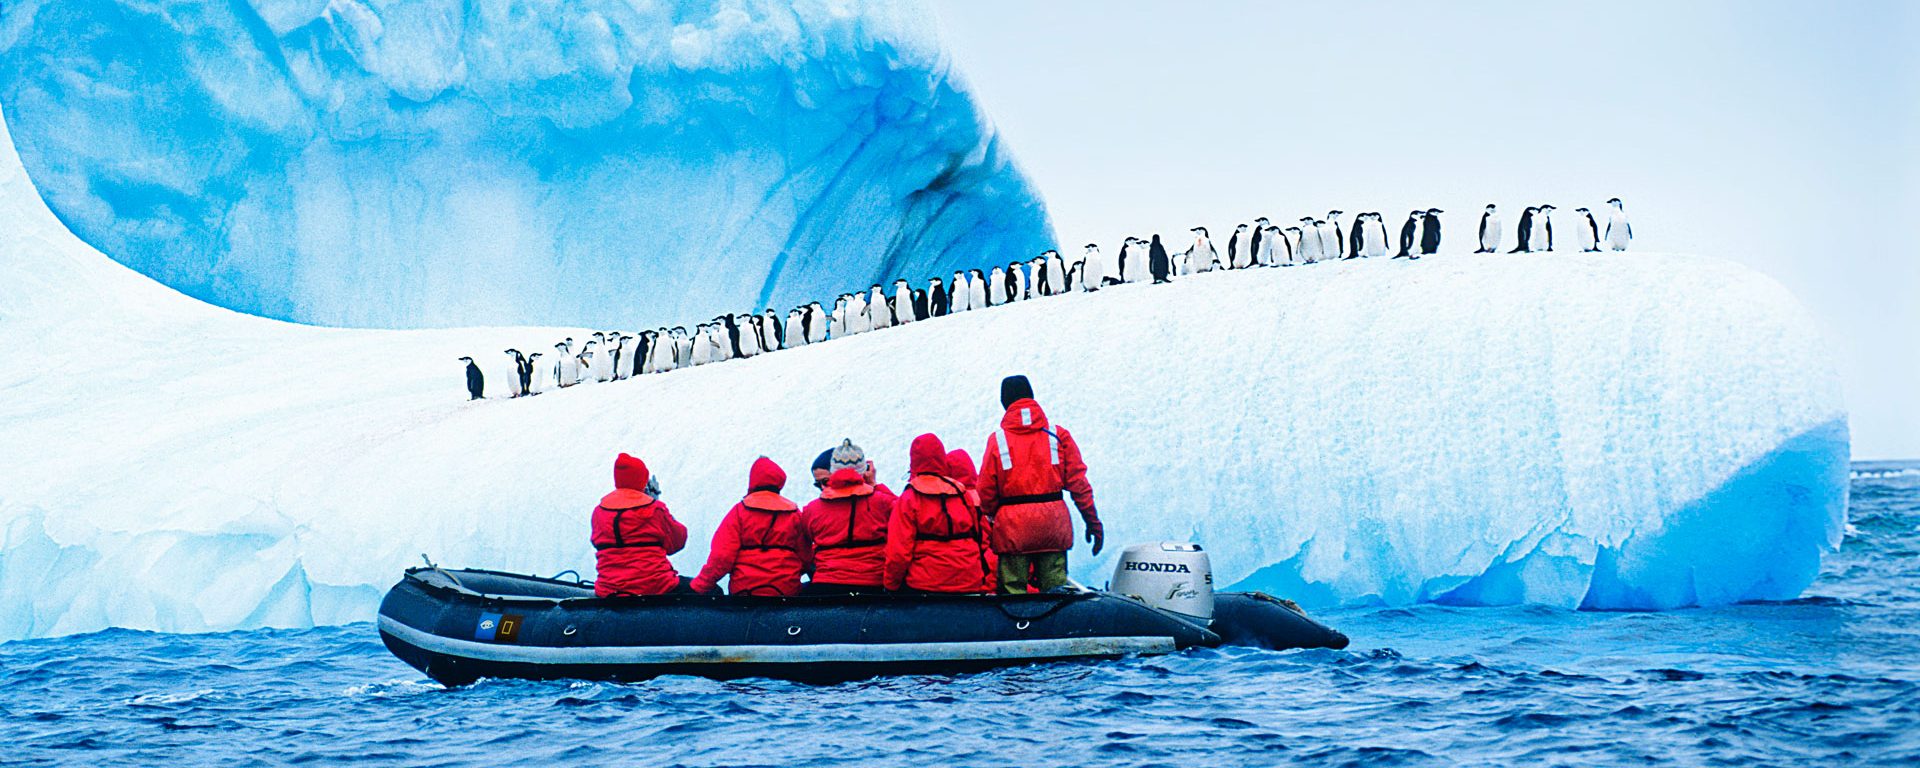 Tourists in a zodiac observe a colony of penguins on an ice ridge in Antarctica